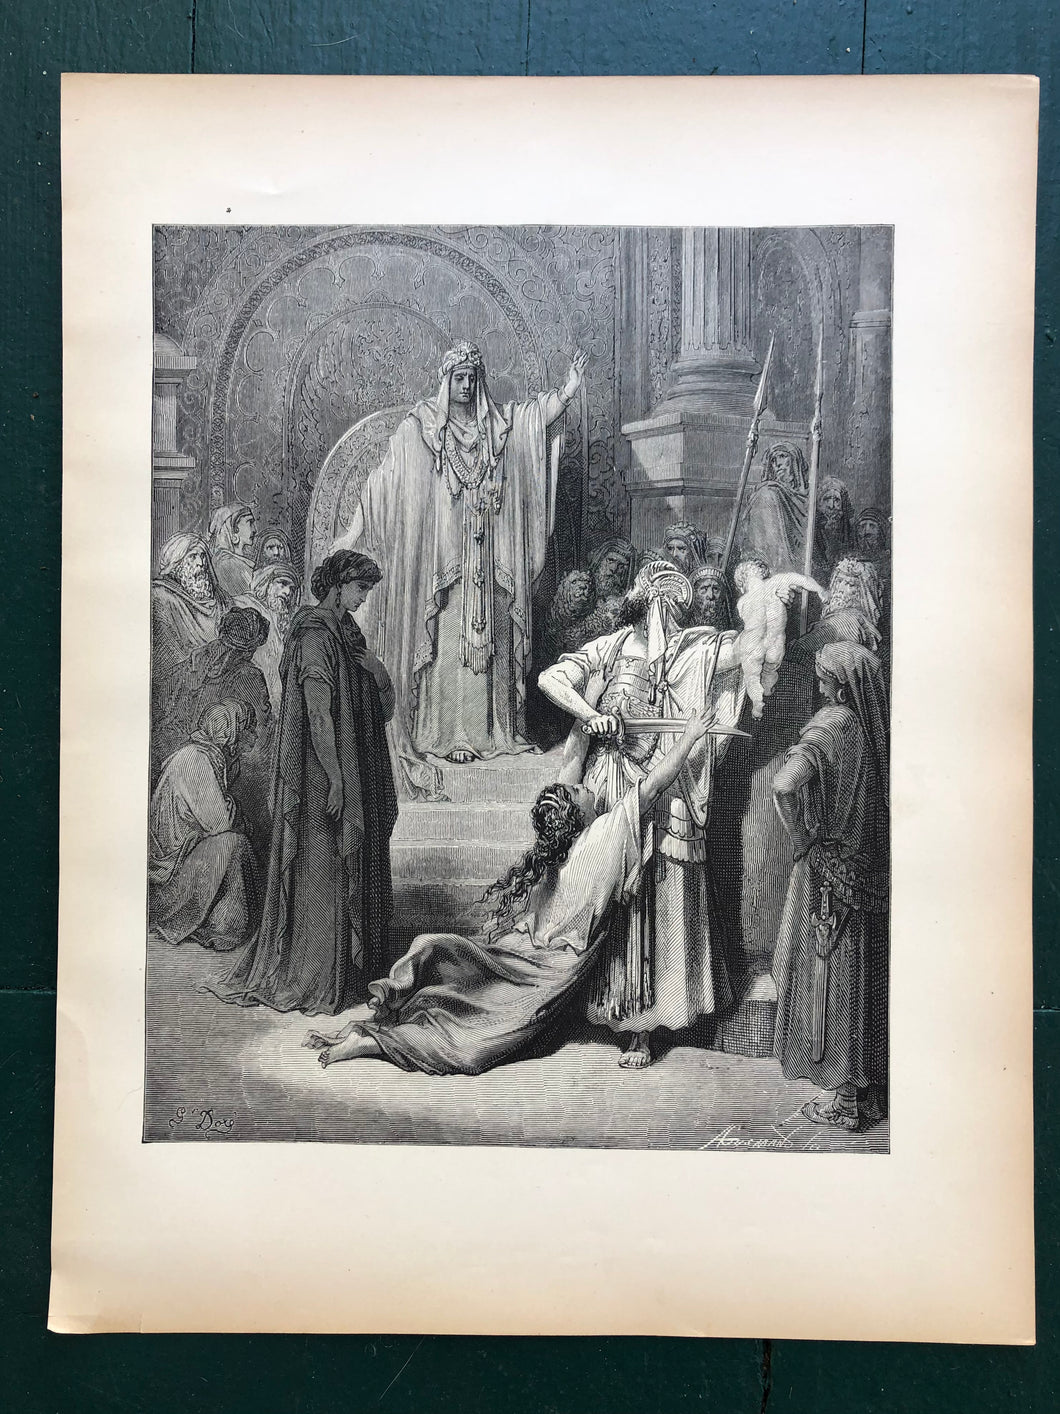 The Judgement of Solomon. Print from The Dore Bible Gallery by Gustave Dore